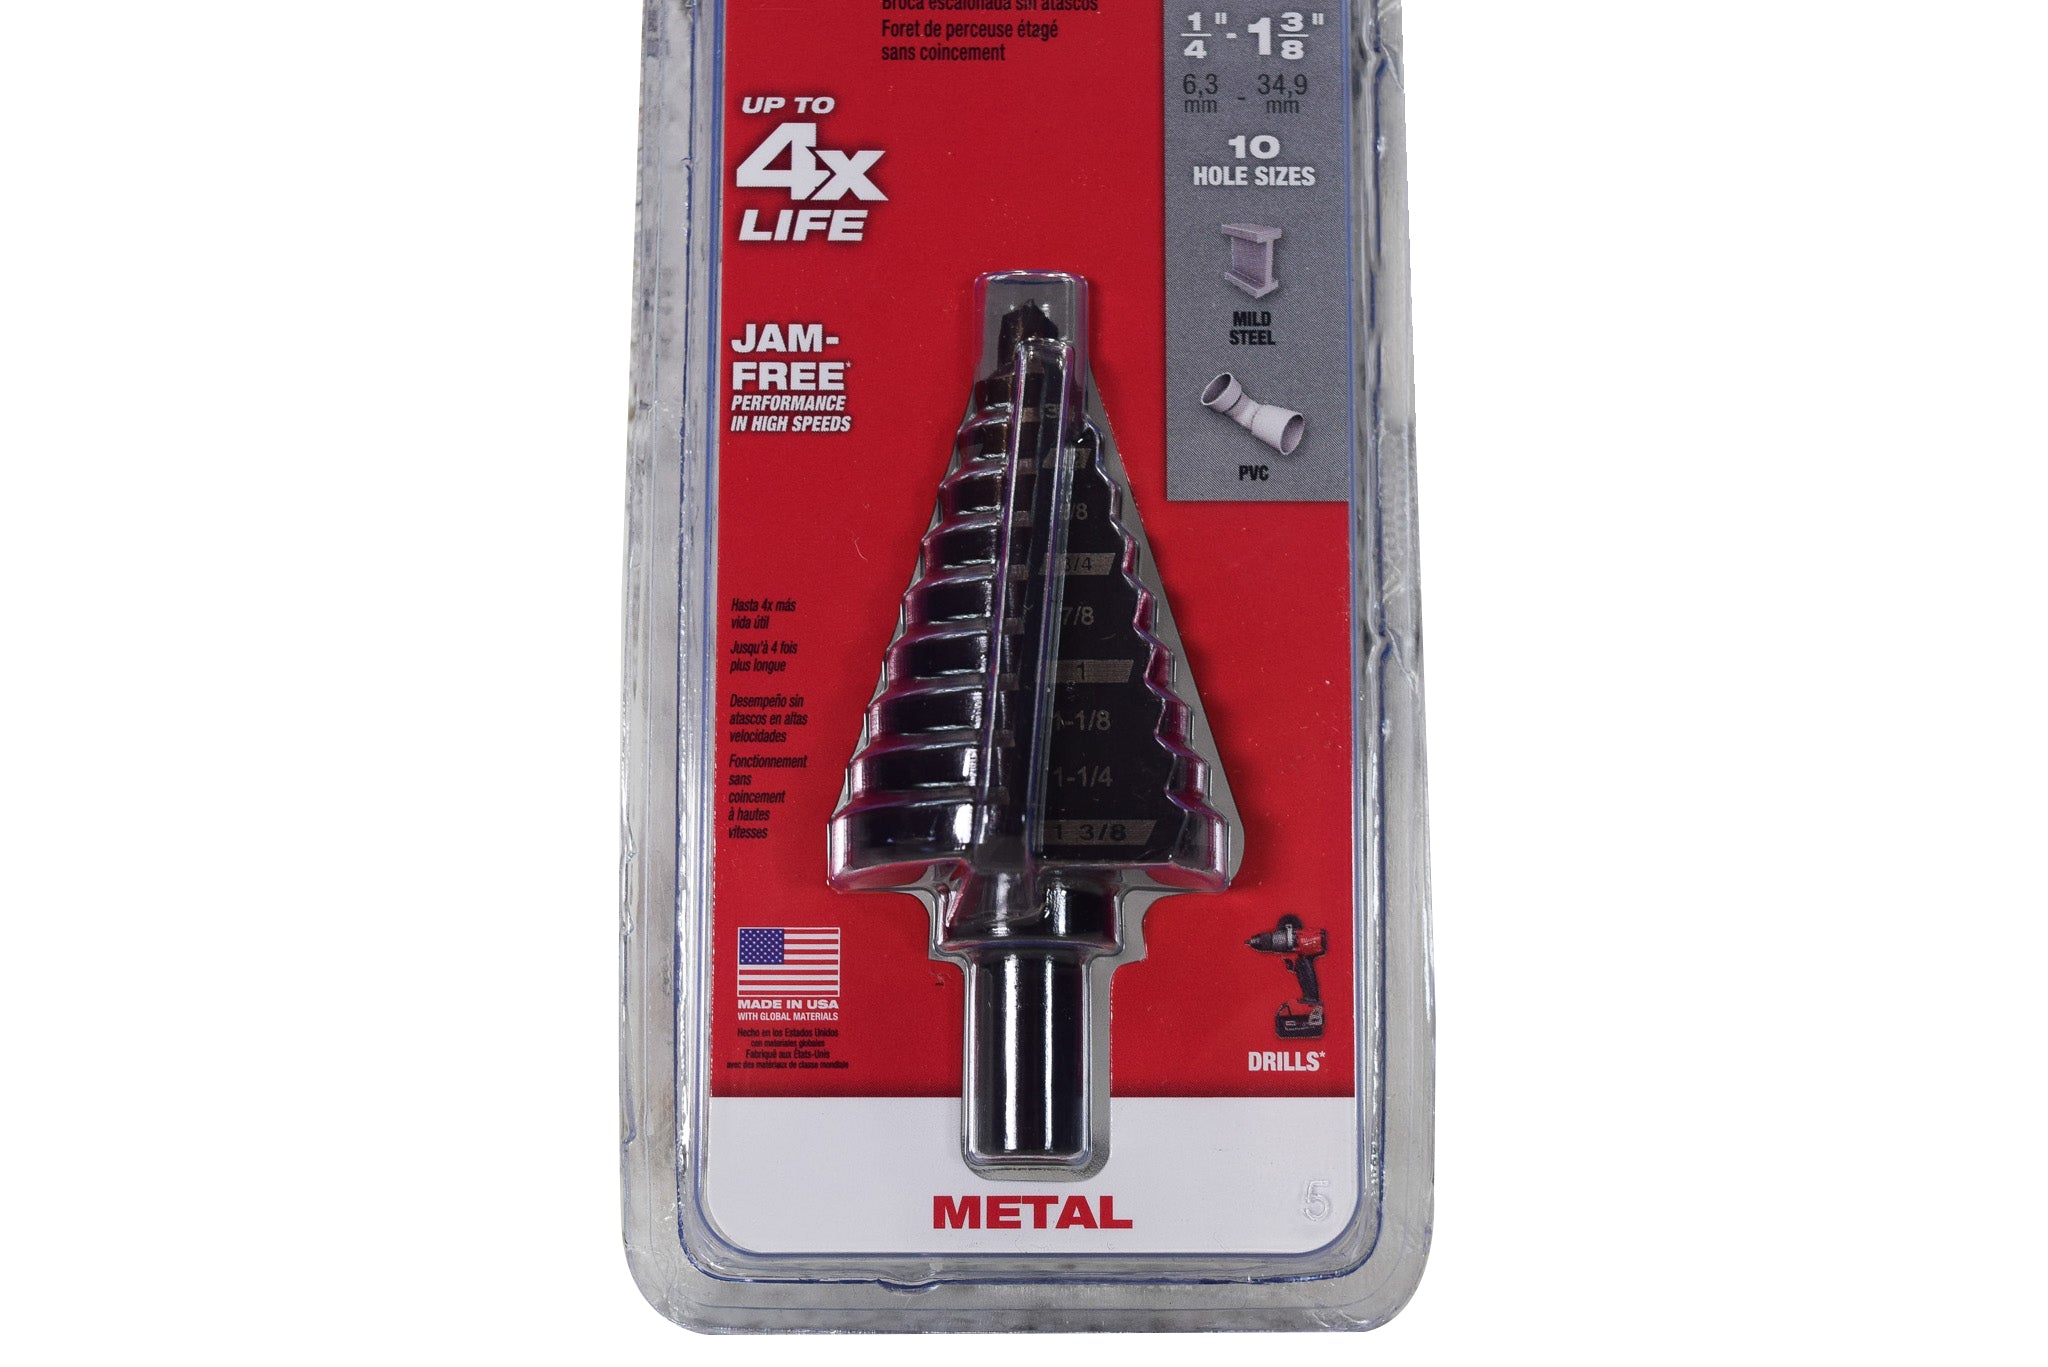 #5 Step Drill Bit, 1/4" - 1-3/8" by 1/8"